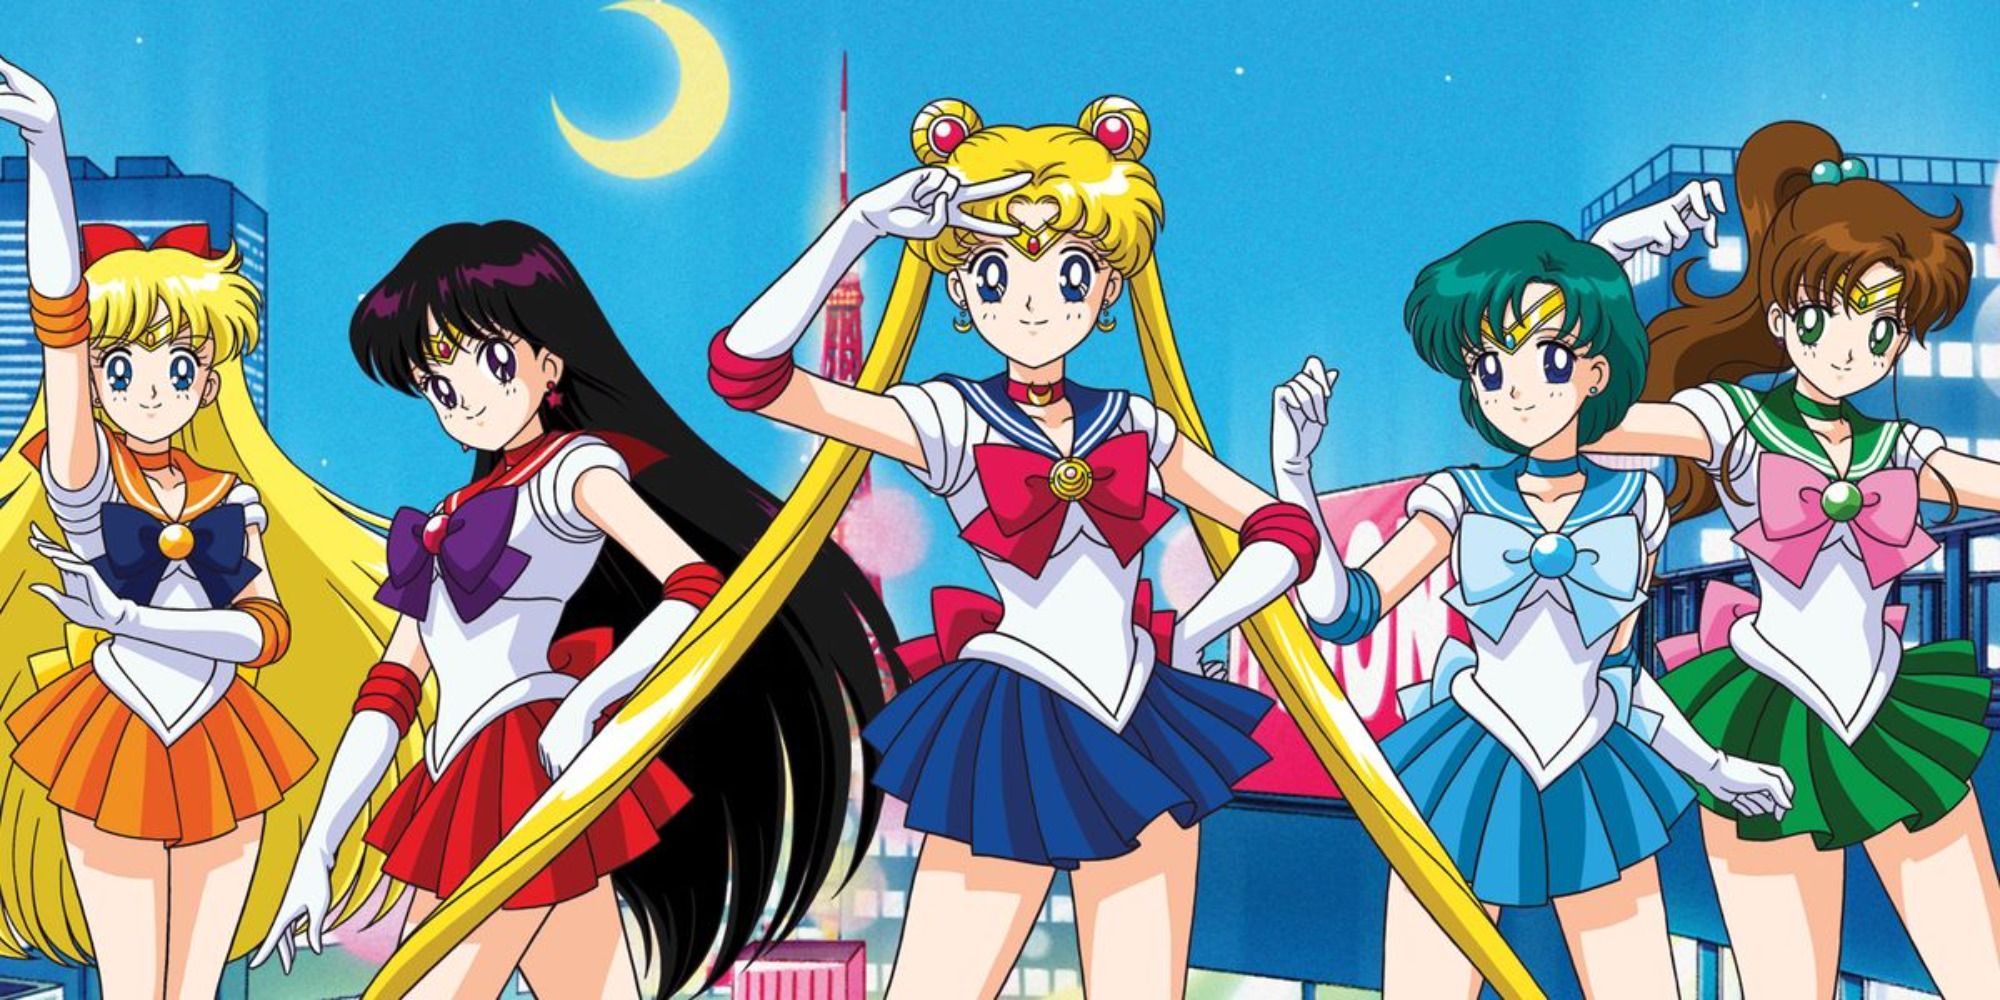 Cover art for the anime Sailor Moon